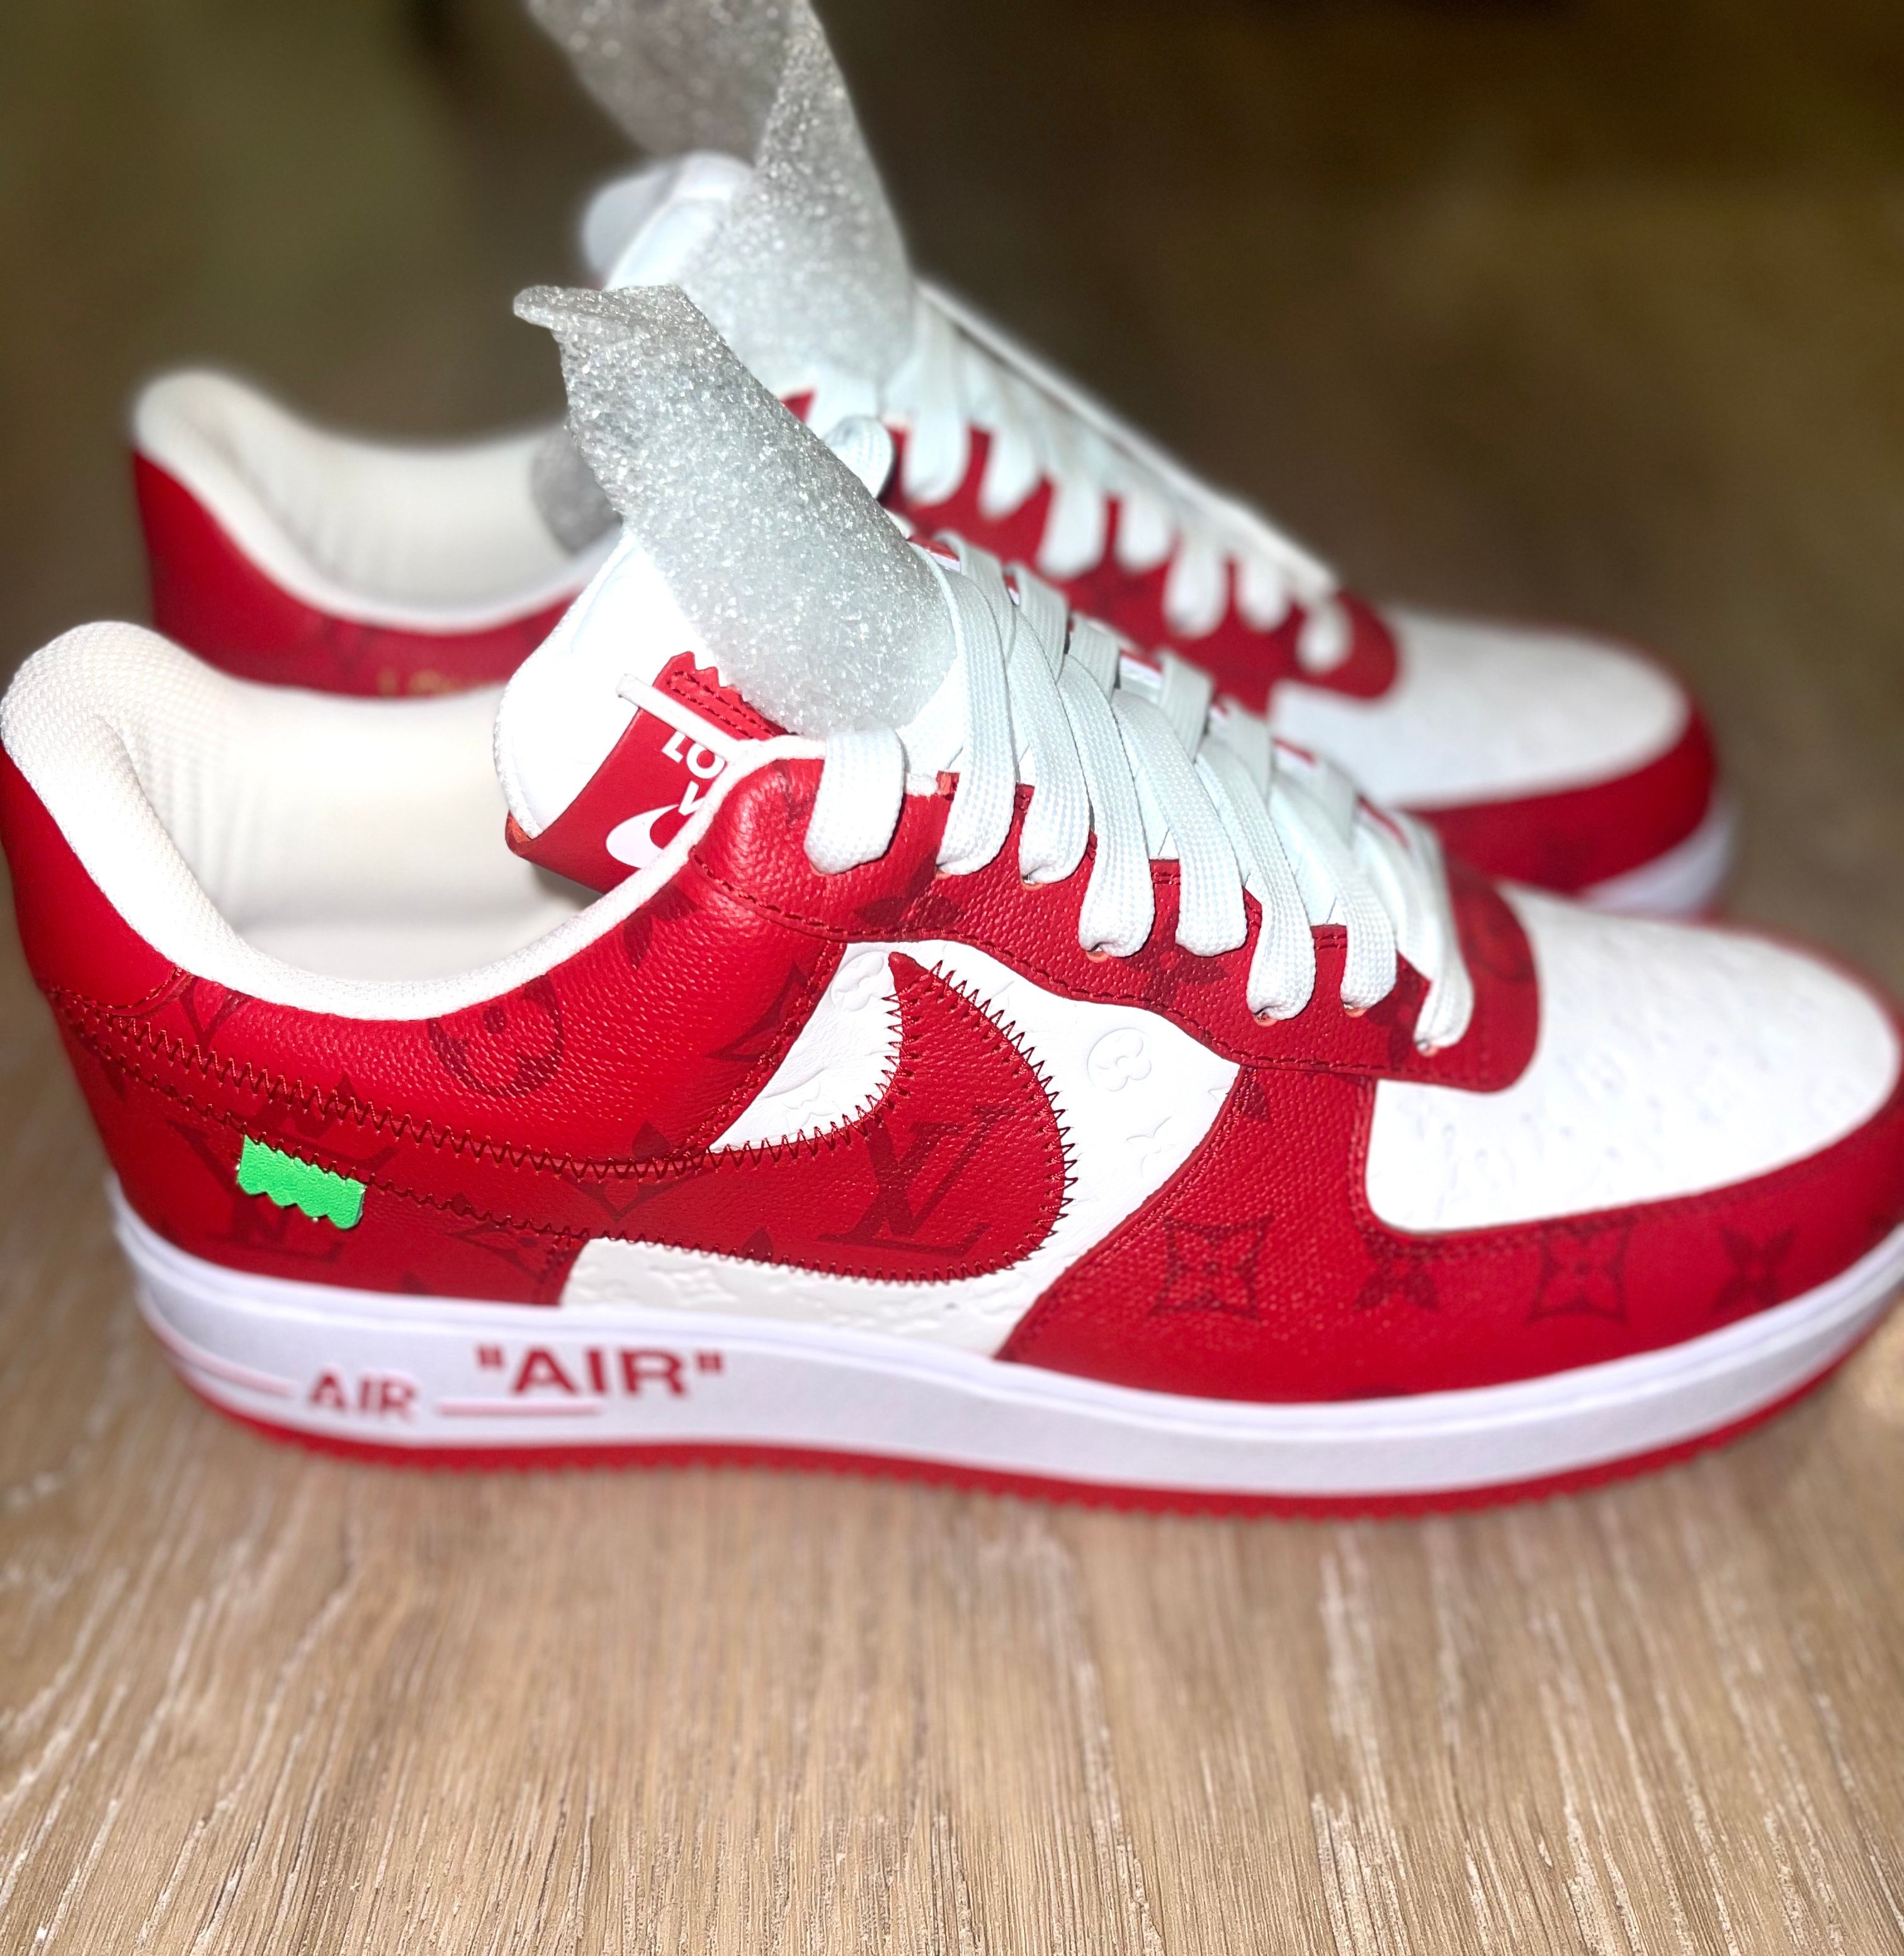 How To: Louis Vuitton (Supreme) Air Force Ones 